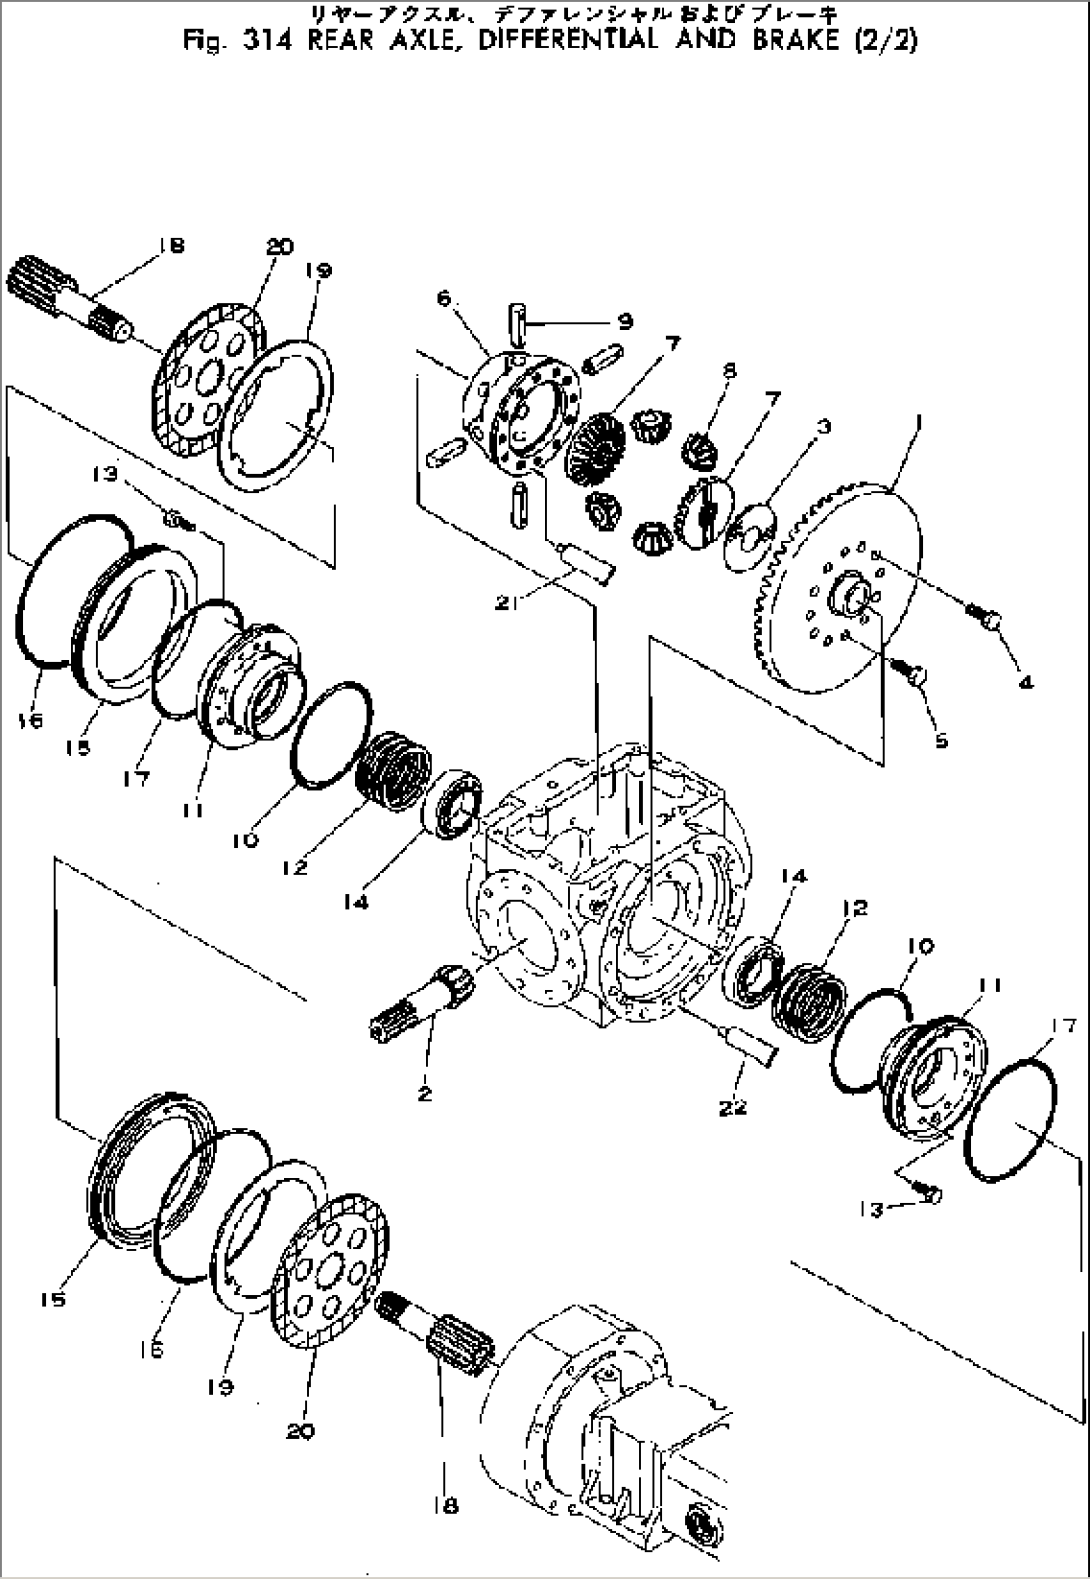 REAR AXLE¤ DIFFERENTIAL AND BRAKE (2/2)